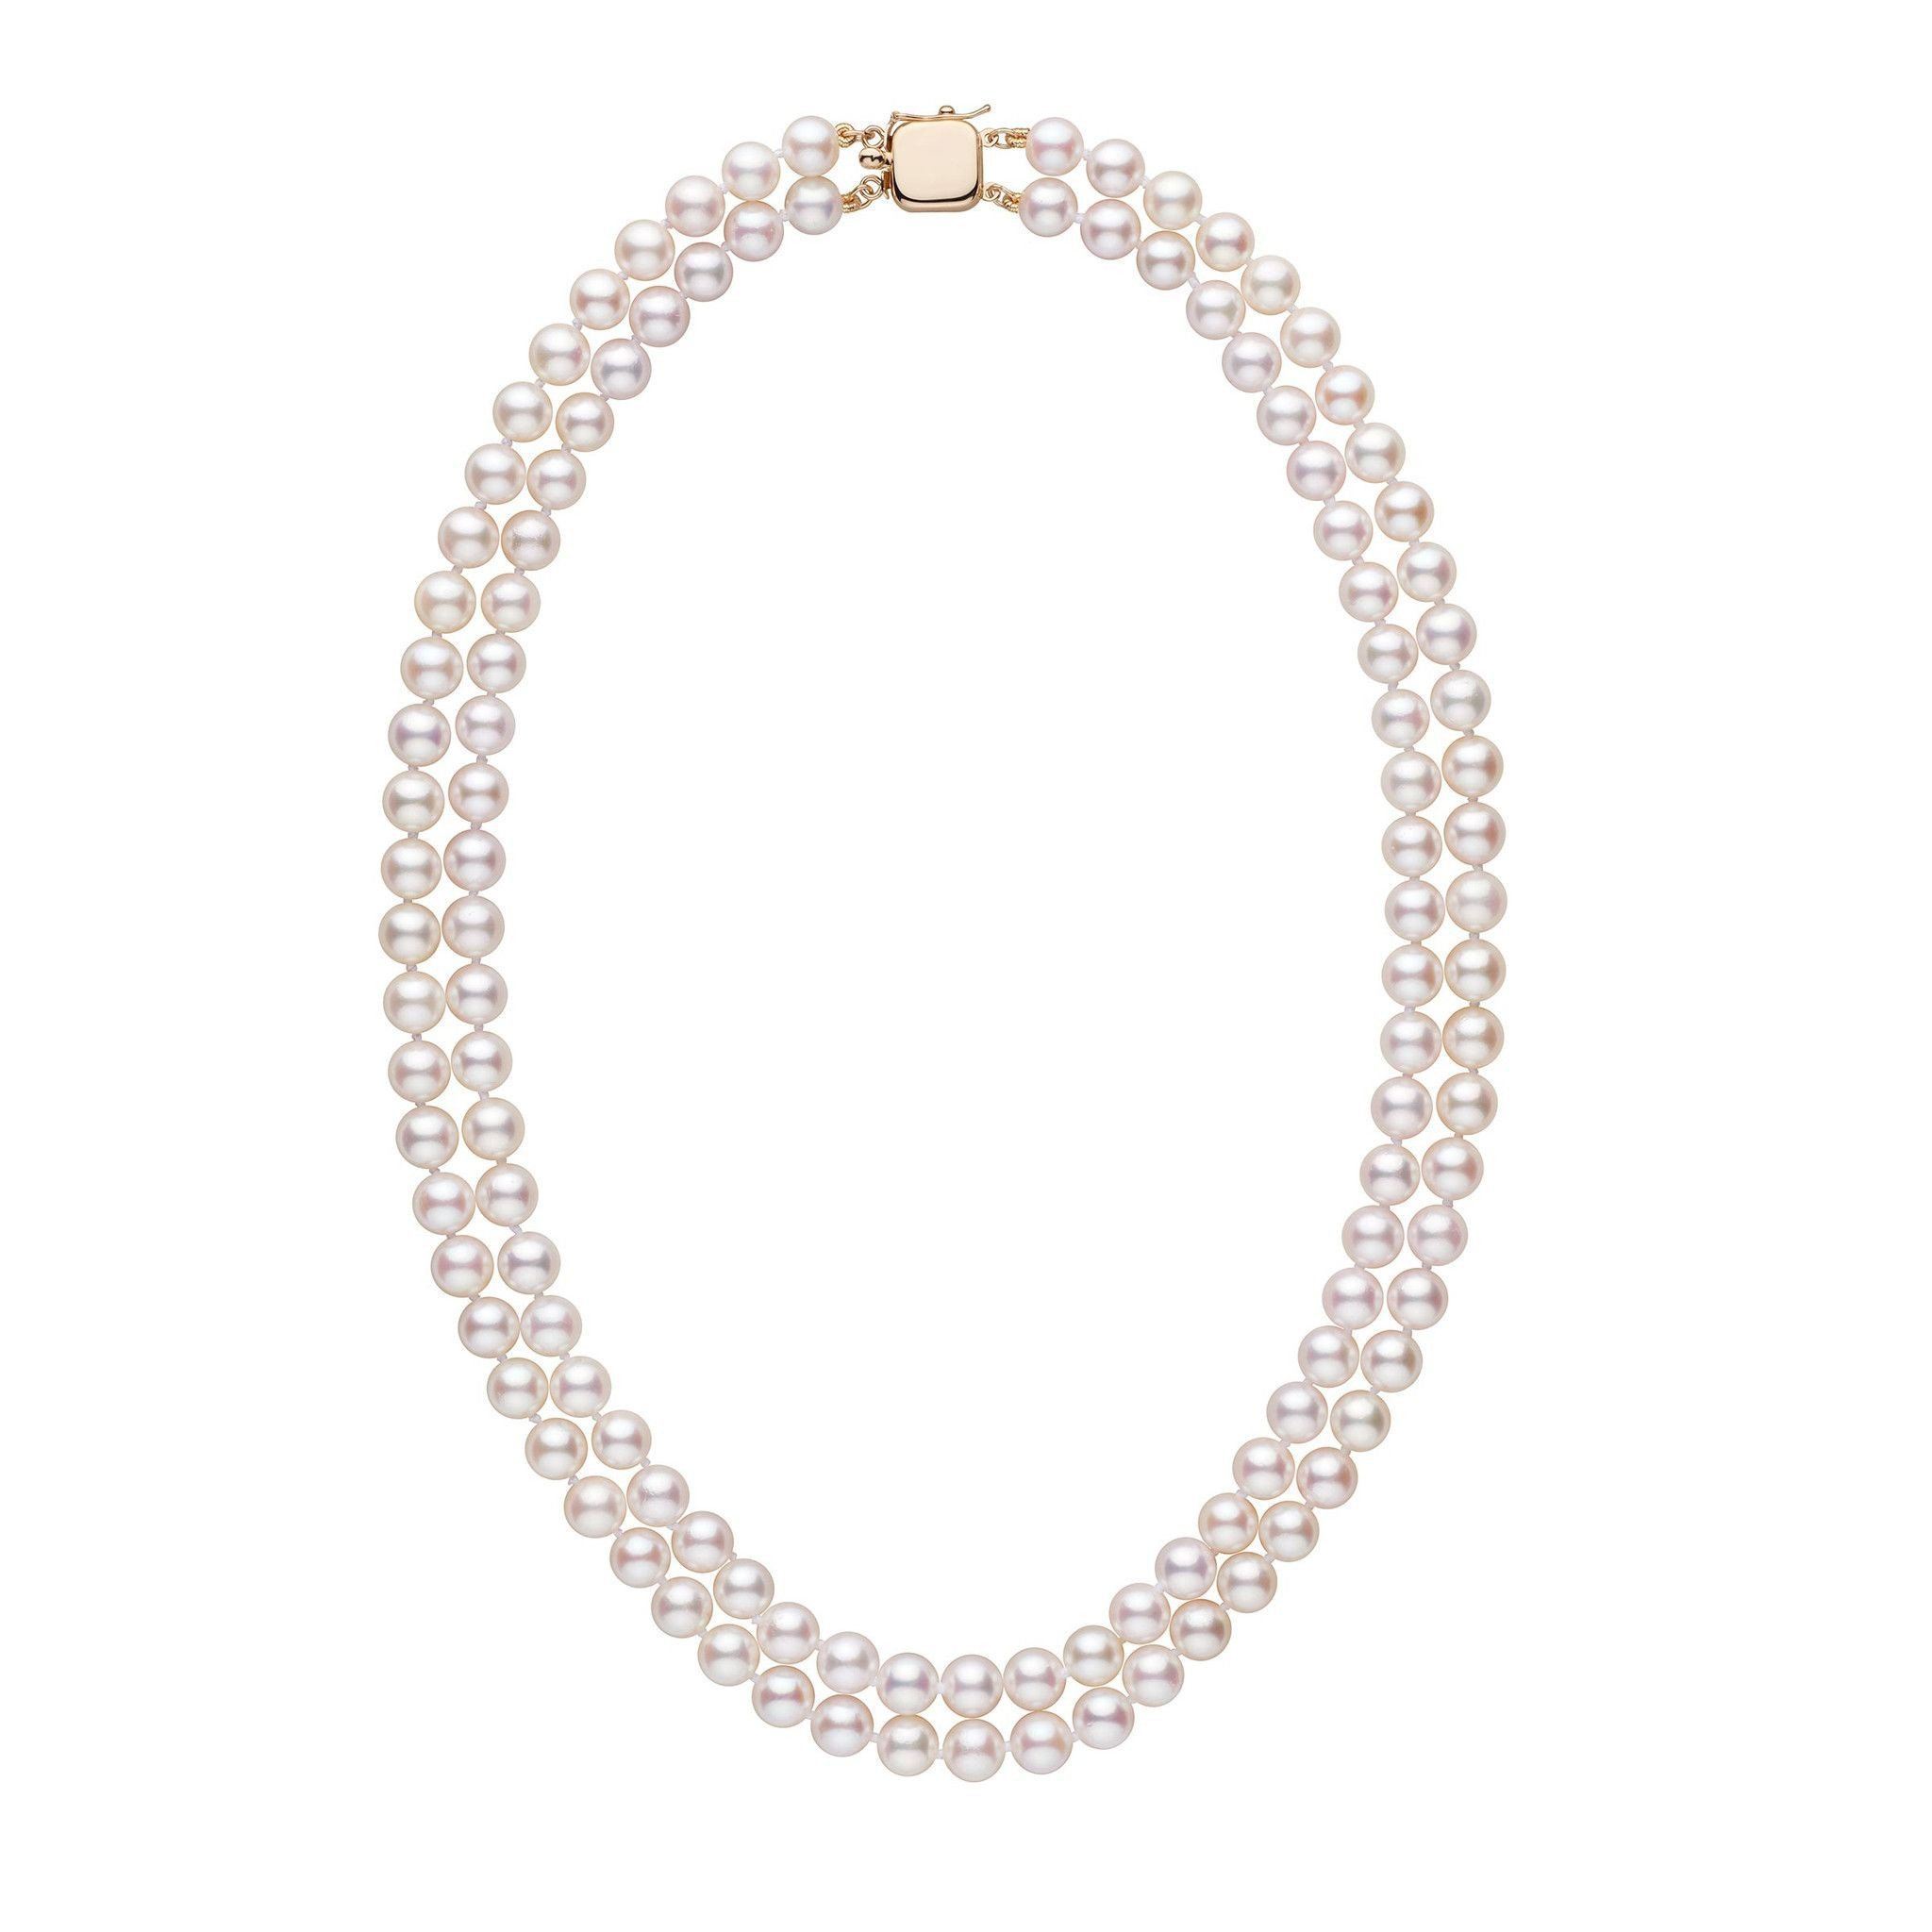 Products 6.5-7.0 mm 18-inch Double-Strand White Akoya AA+ Pearl Necklace Yellow Gold